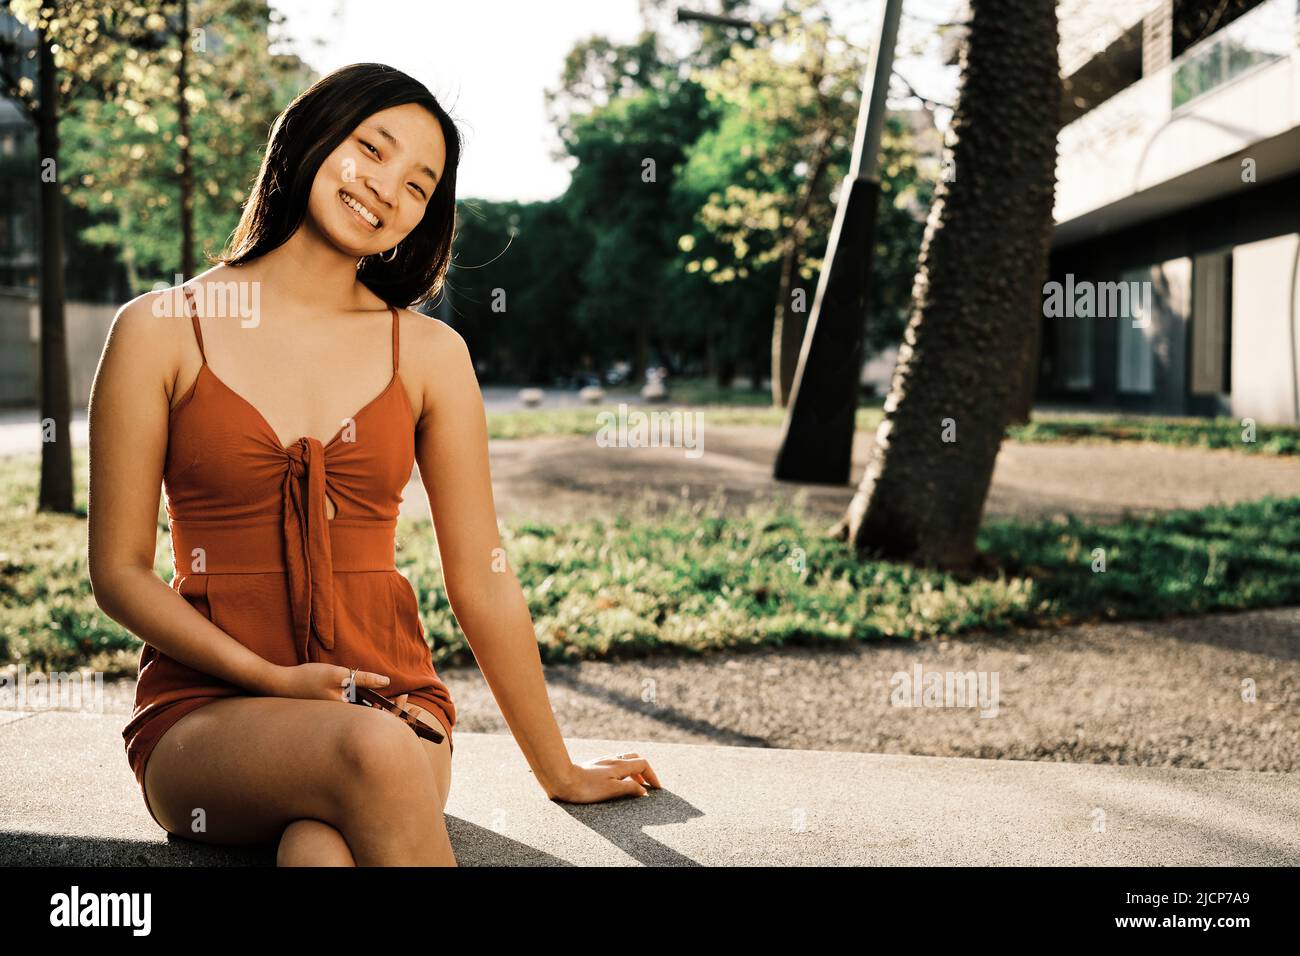 Young Asian woman smiling at the camera while relaxing sitting on a bench outdoors. Stock Photo